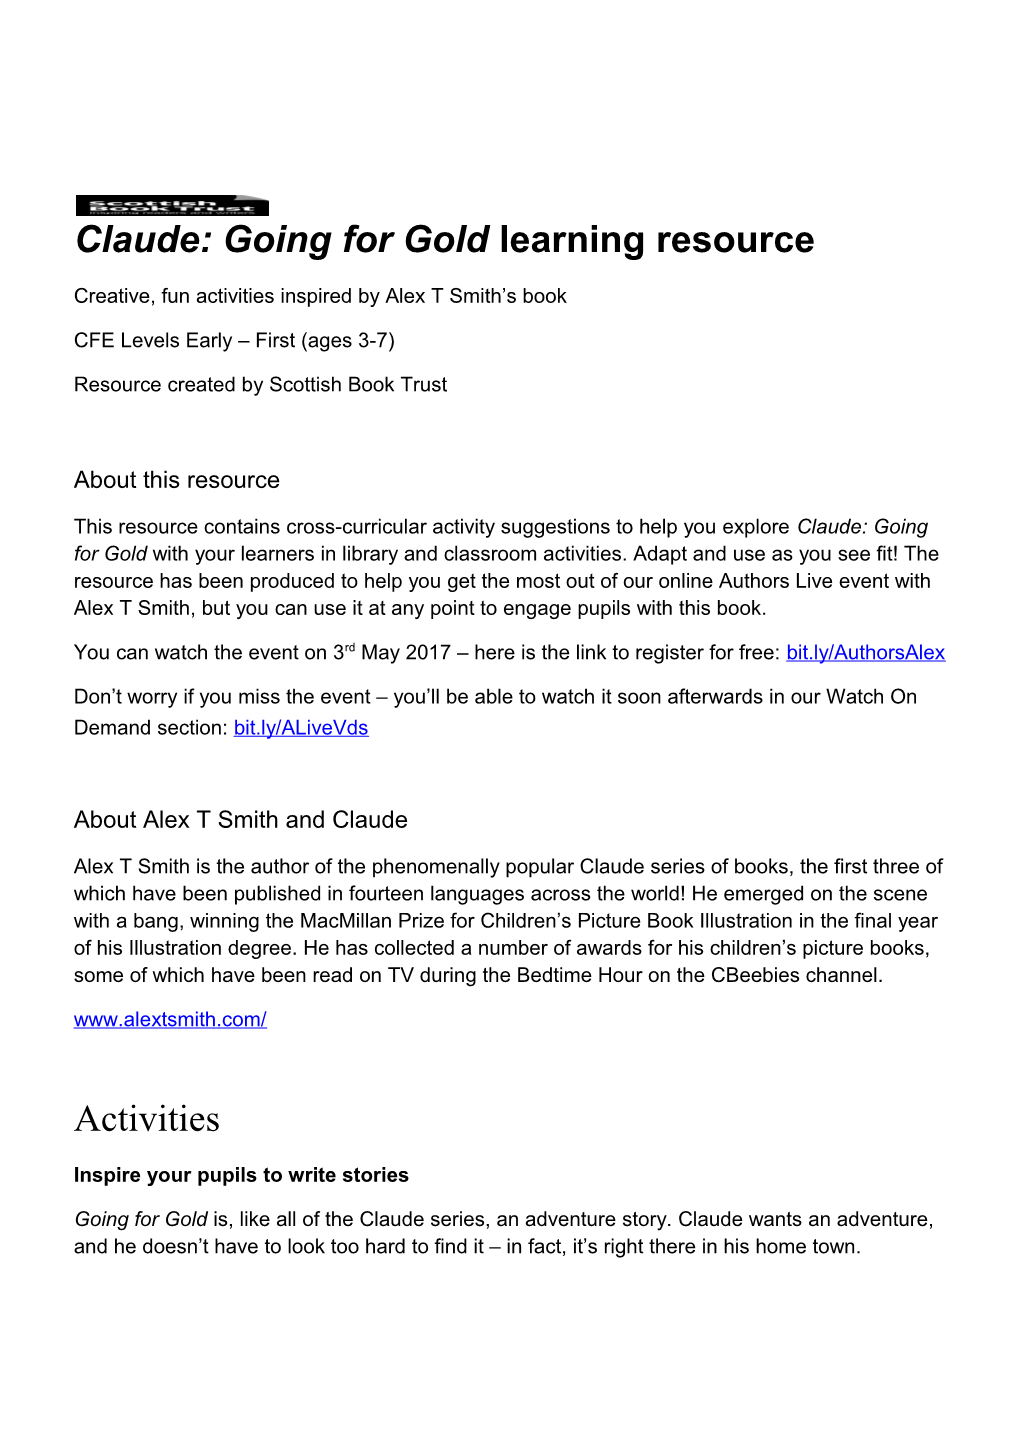 Claude: Going for Gold Learning Resource